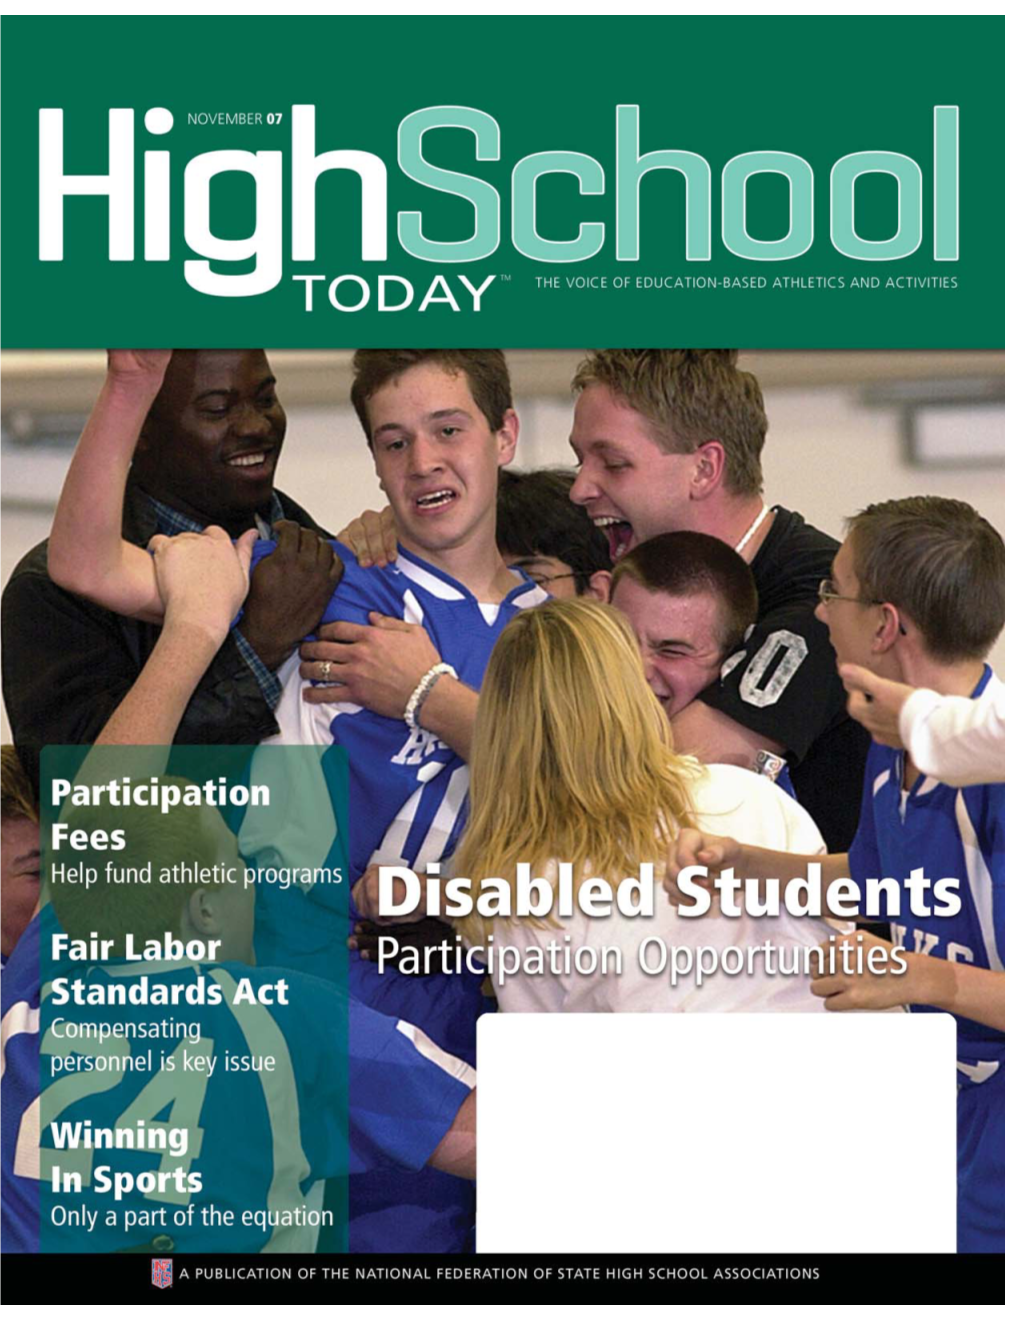 High School Today November 07 Layout 1